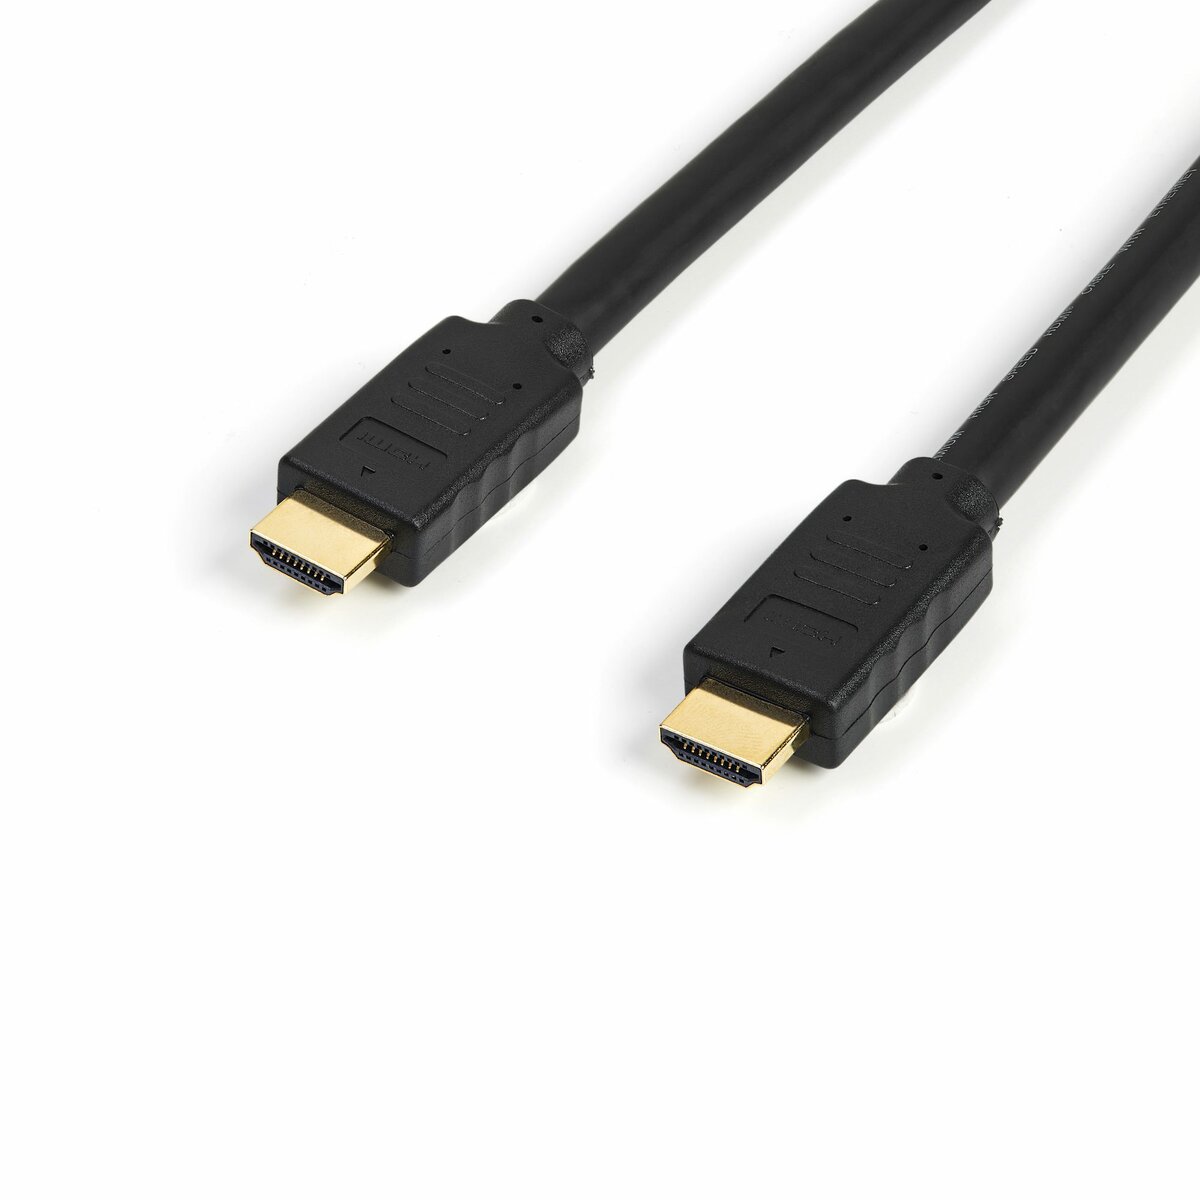 4K@60Hz Certified Premium High Speed HDMI Cable w/ Ethernet